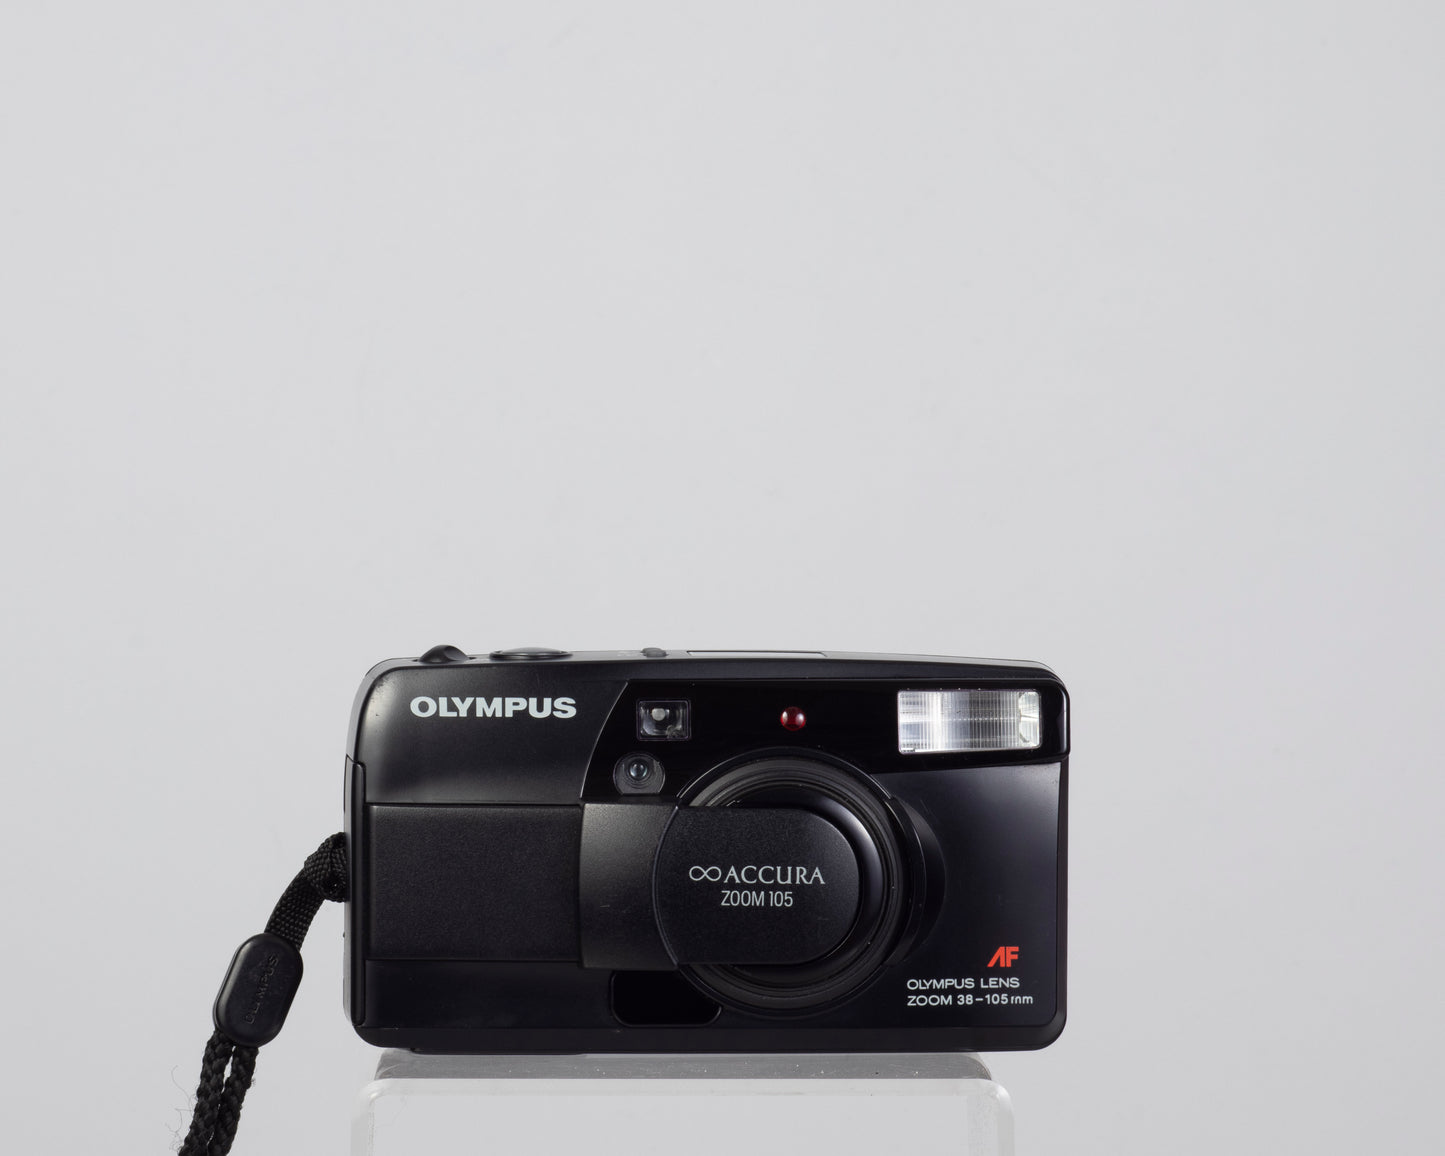 The Olympus Infinity Accura Zoom 105 35mm film camera with 38-105mm zoom lens